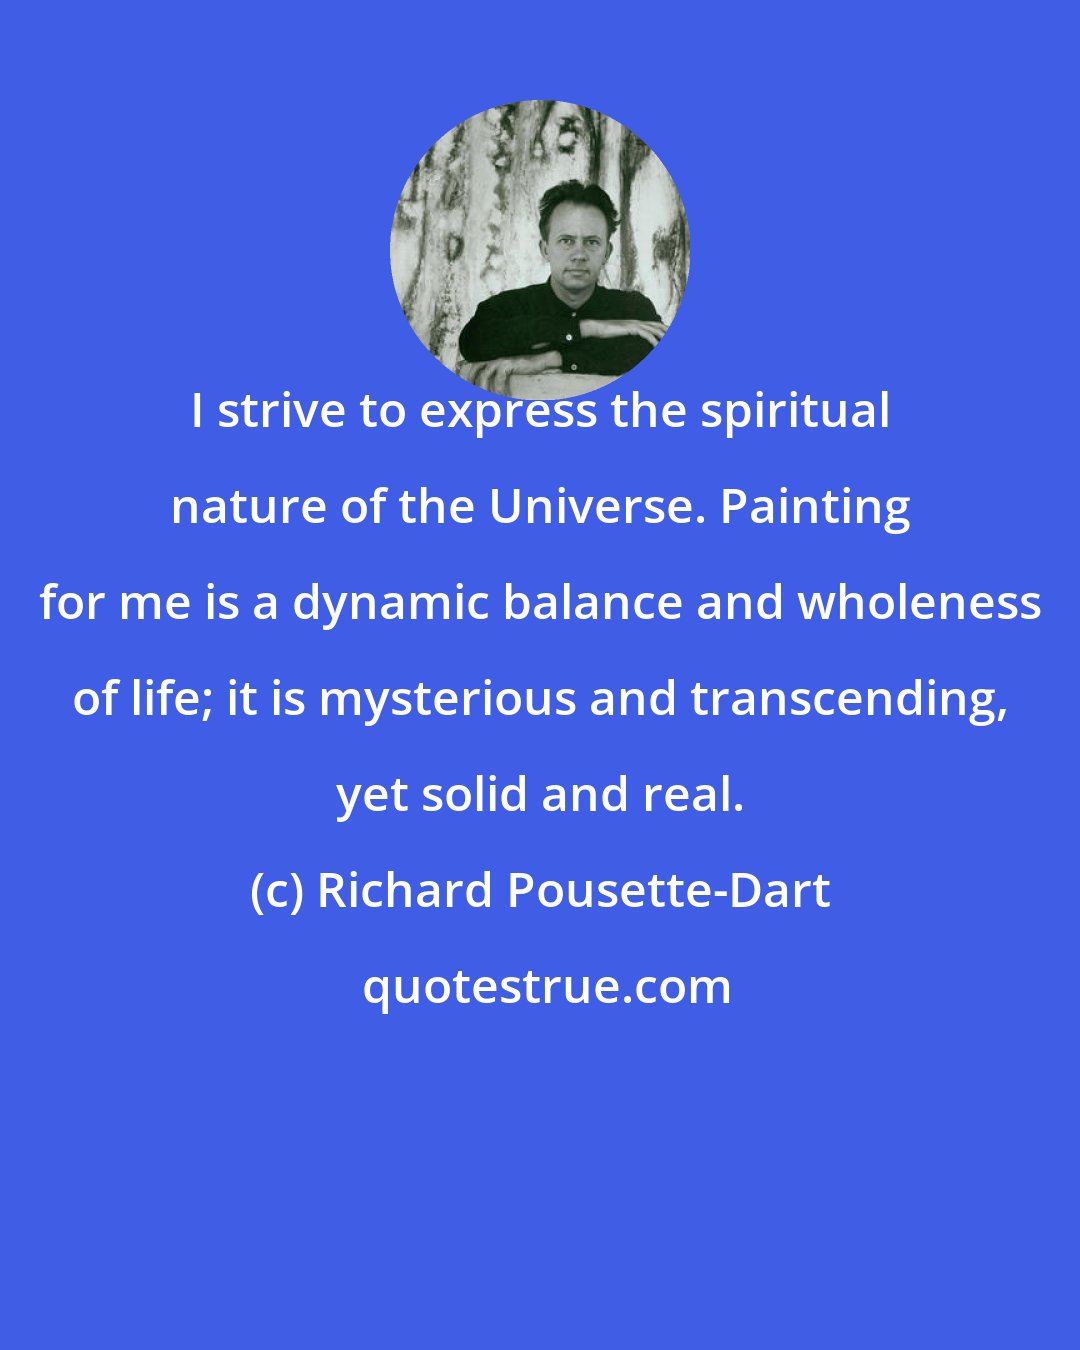 Richard Pousette-Dart: I strive to express the spiritual nature of the Universe. Painting for me is a dynamic balance and wholeness of life; it is mysterious and transcending, yet solid and real.